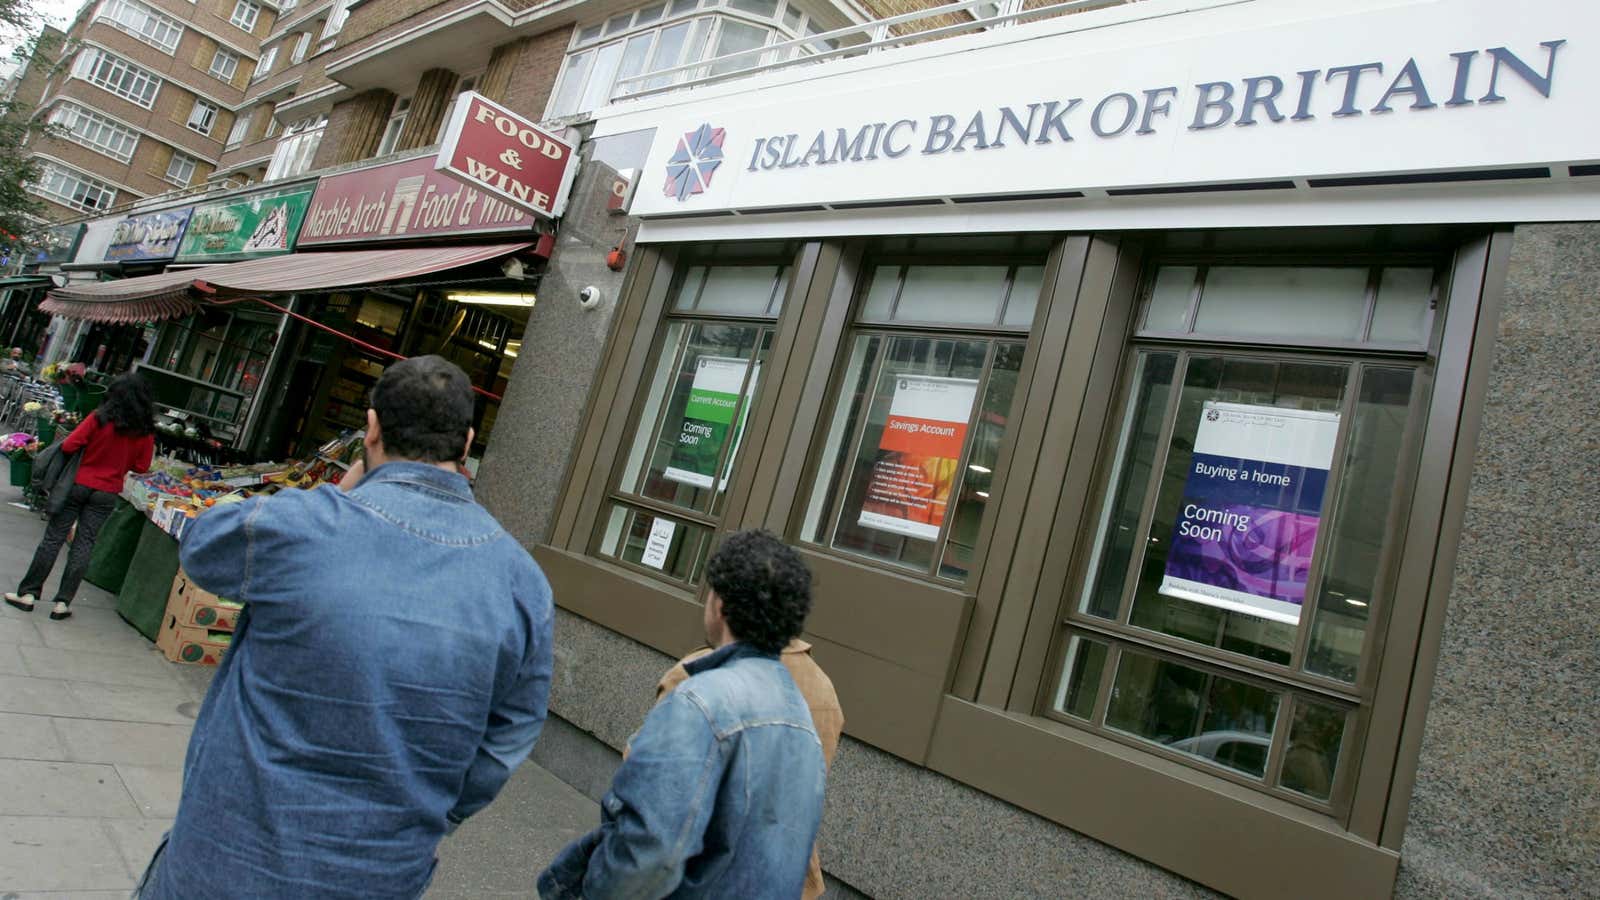 The UK is home to 2.7 million Muslims and three Islamic banks.